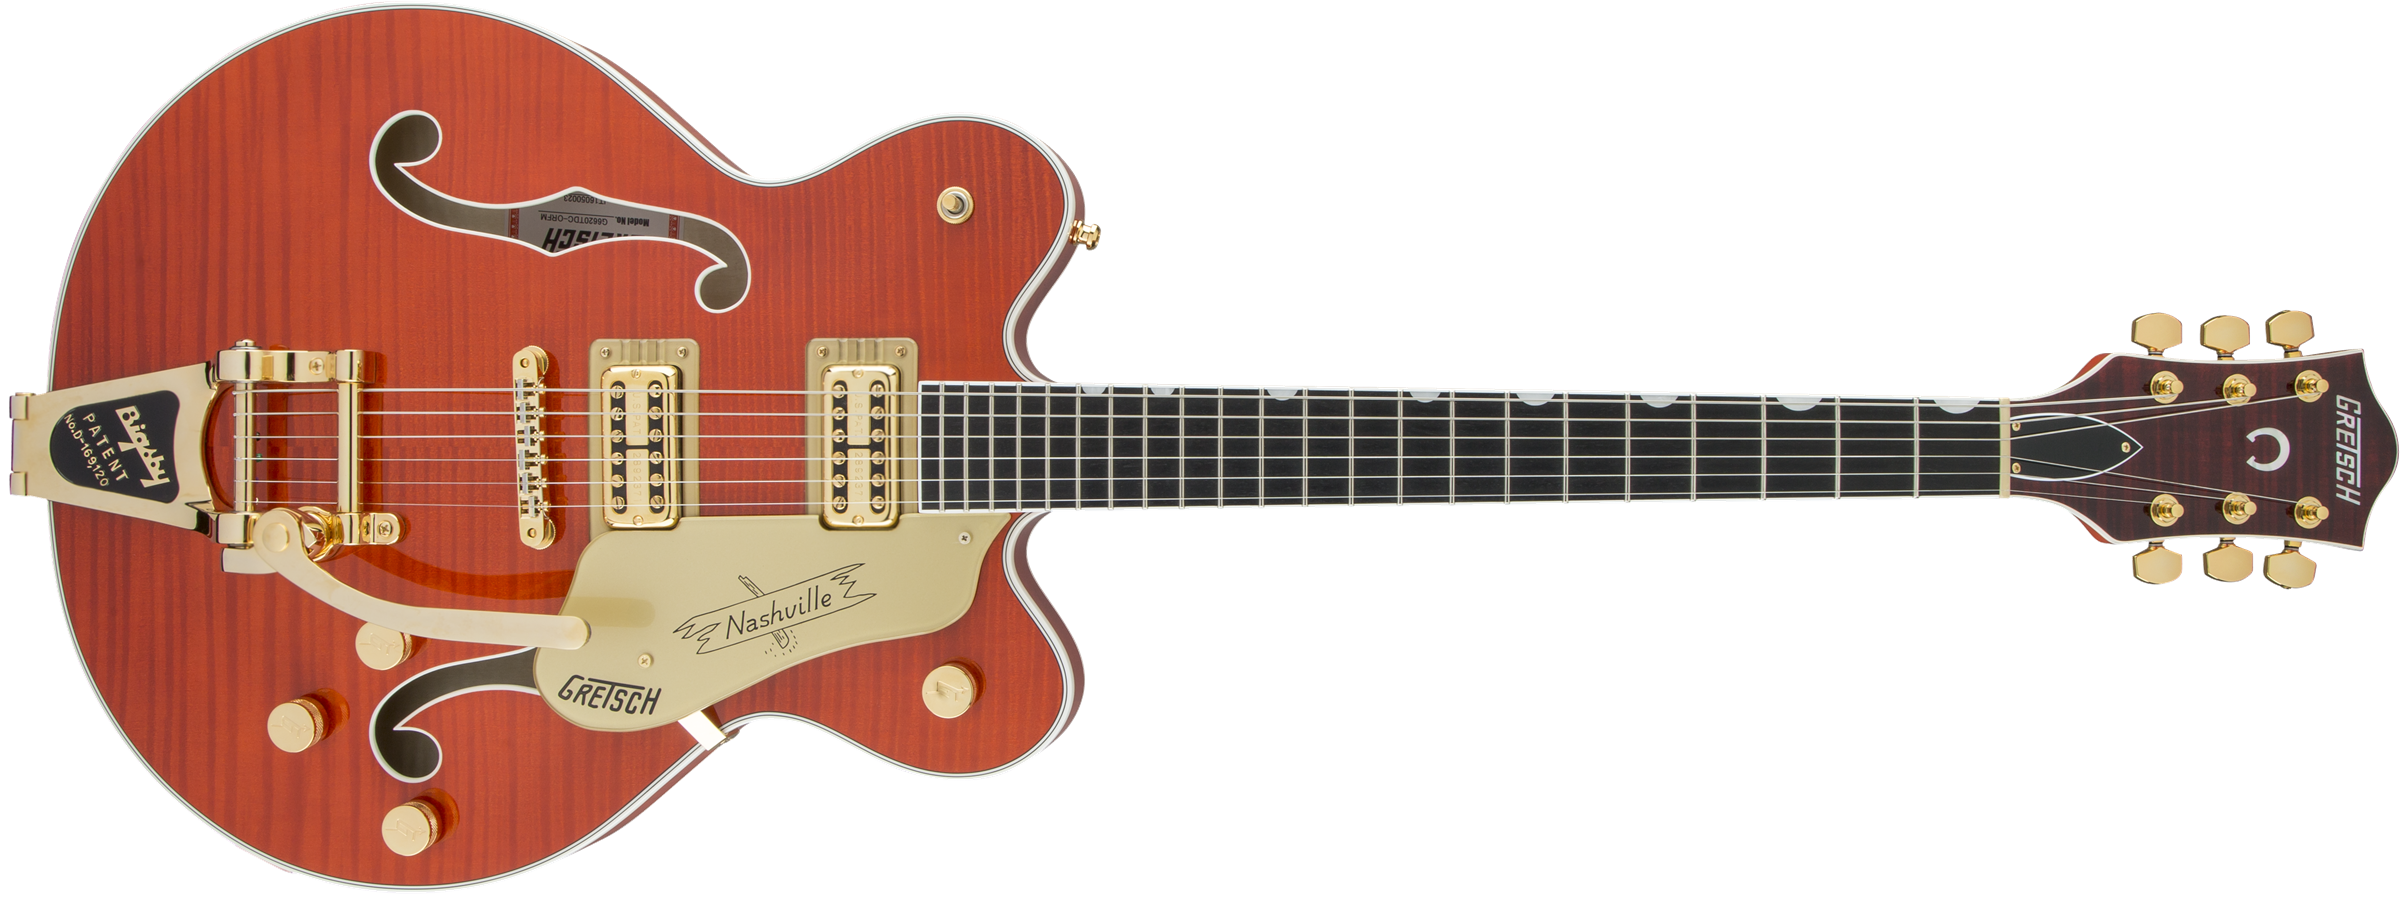 Gretsch G6620TFM Players Edition Nashville Center Block Double-Cut with String-Thru Bigsby FilterTron Pickups, Tiger Flame Maple, Orange Stain